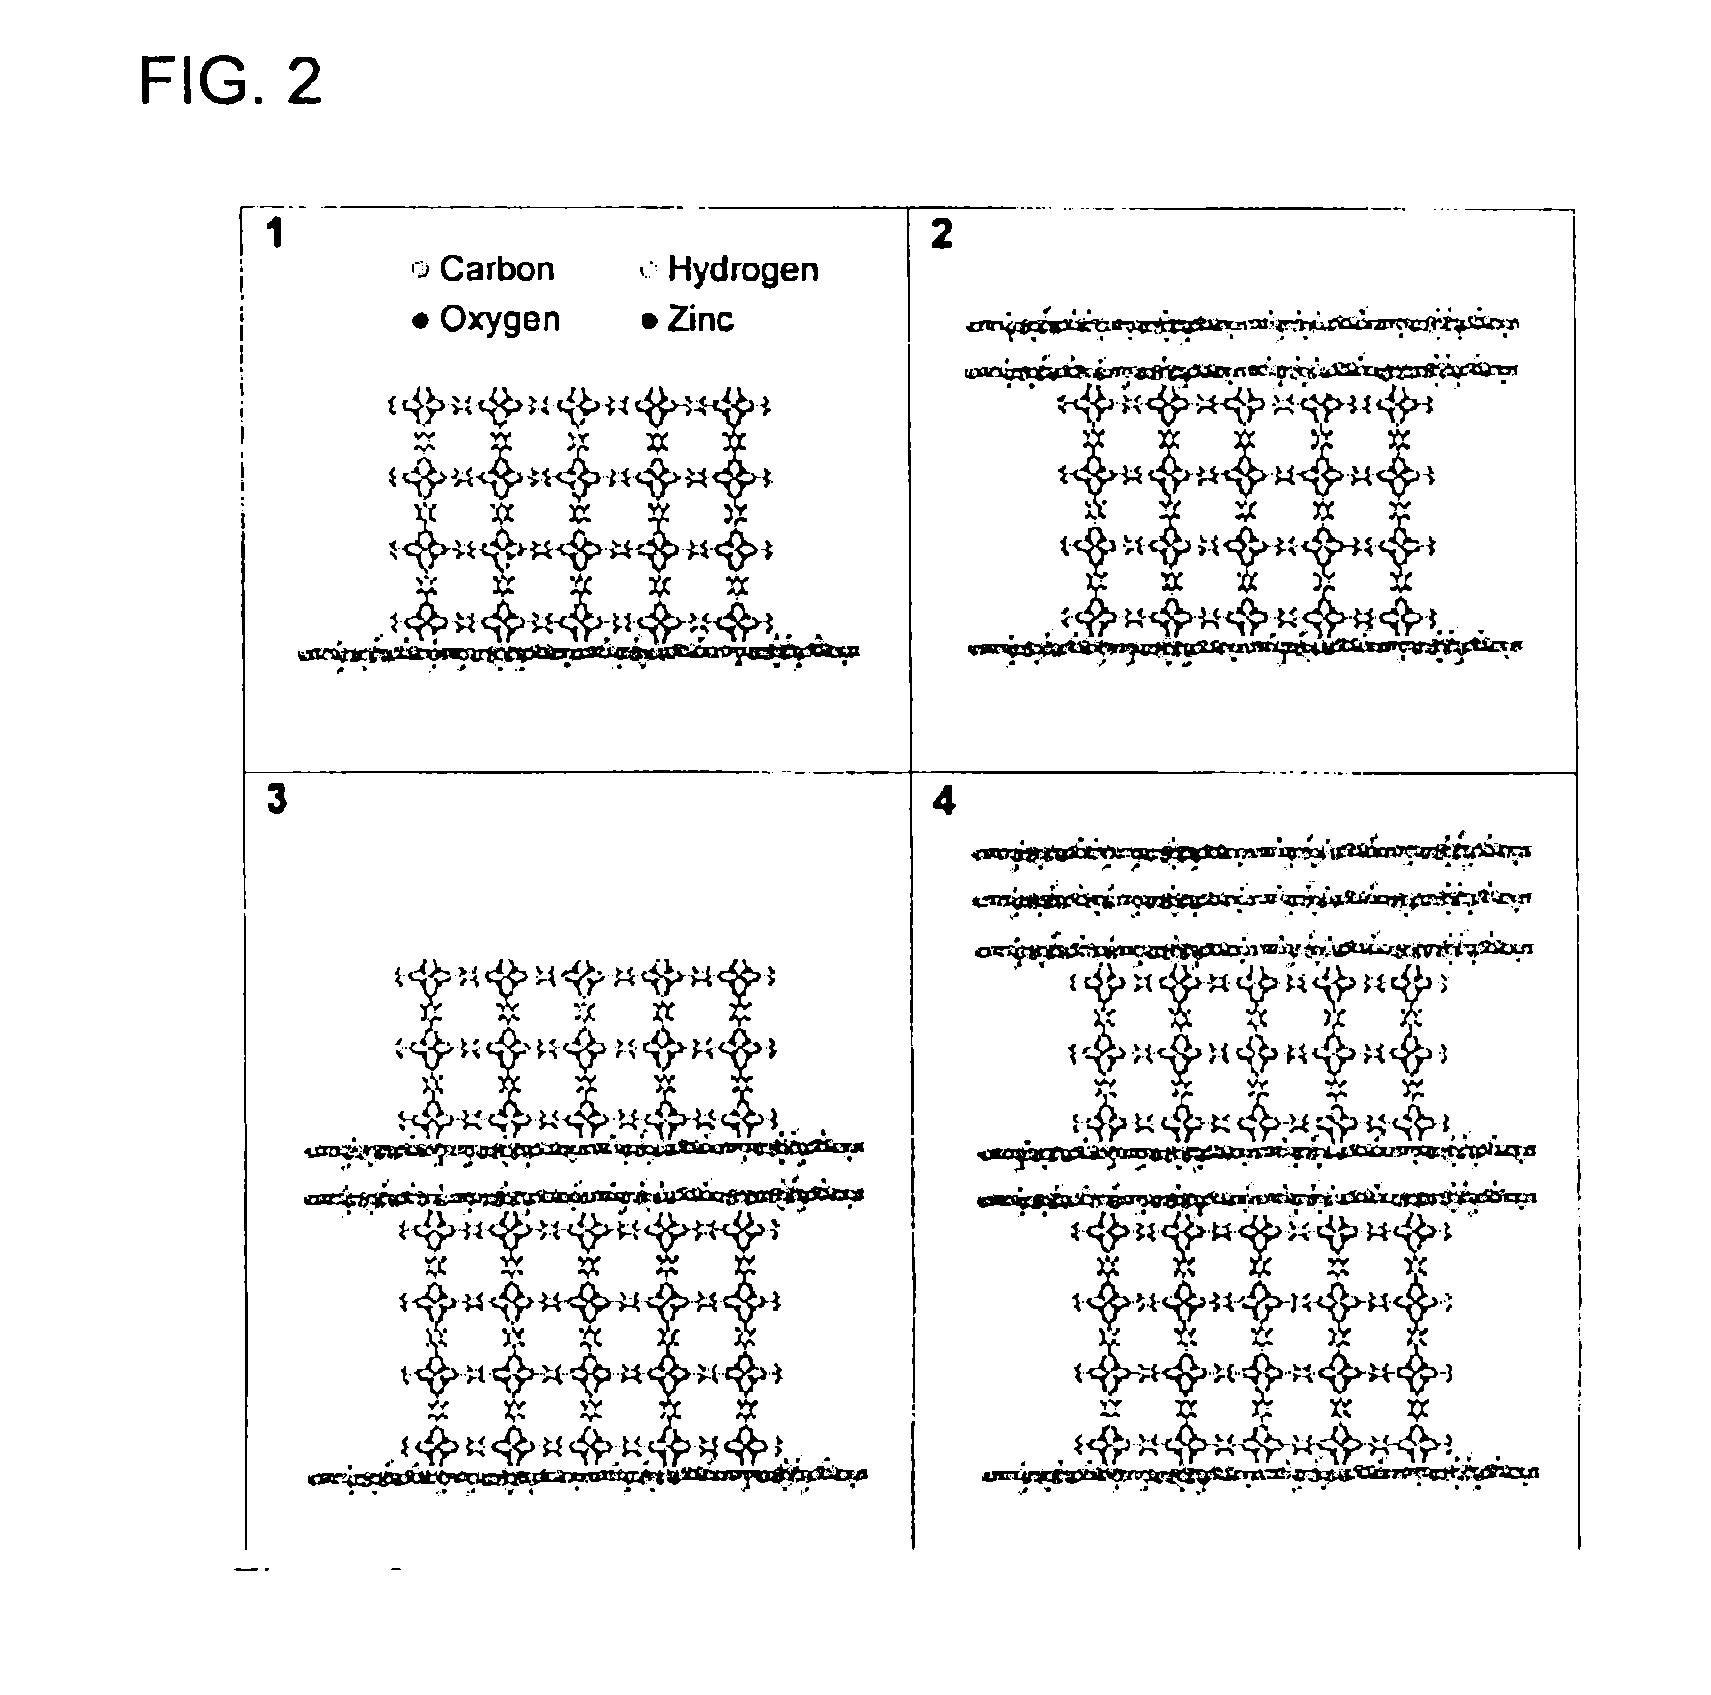 Nanocomposite Materials Comprising Metal-Organic-Framework Units and Graphite-Based Materials, and Methods of Using Same